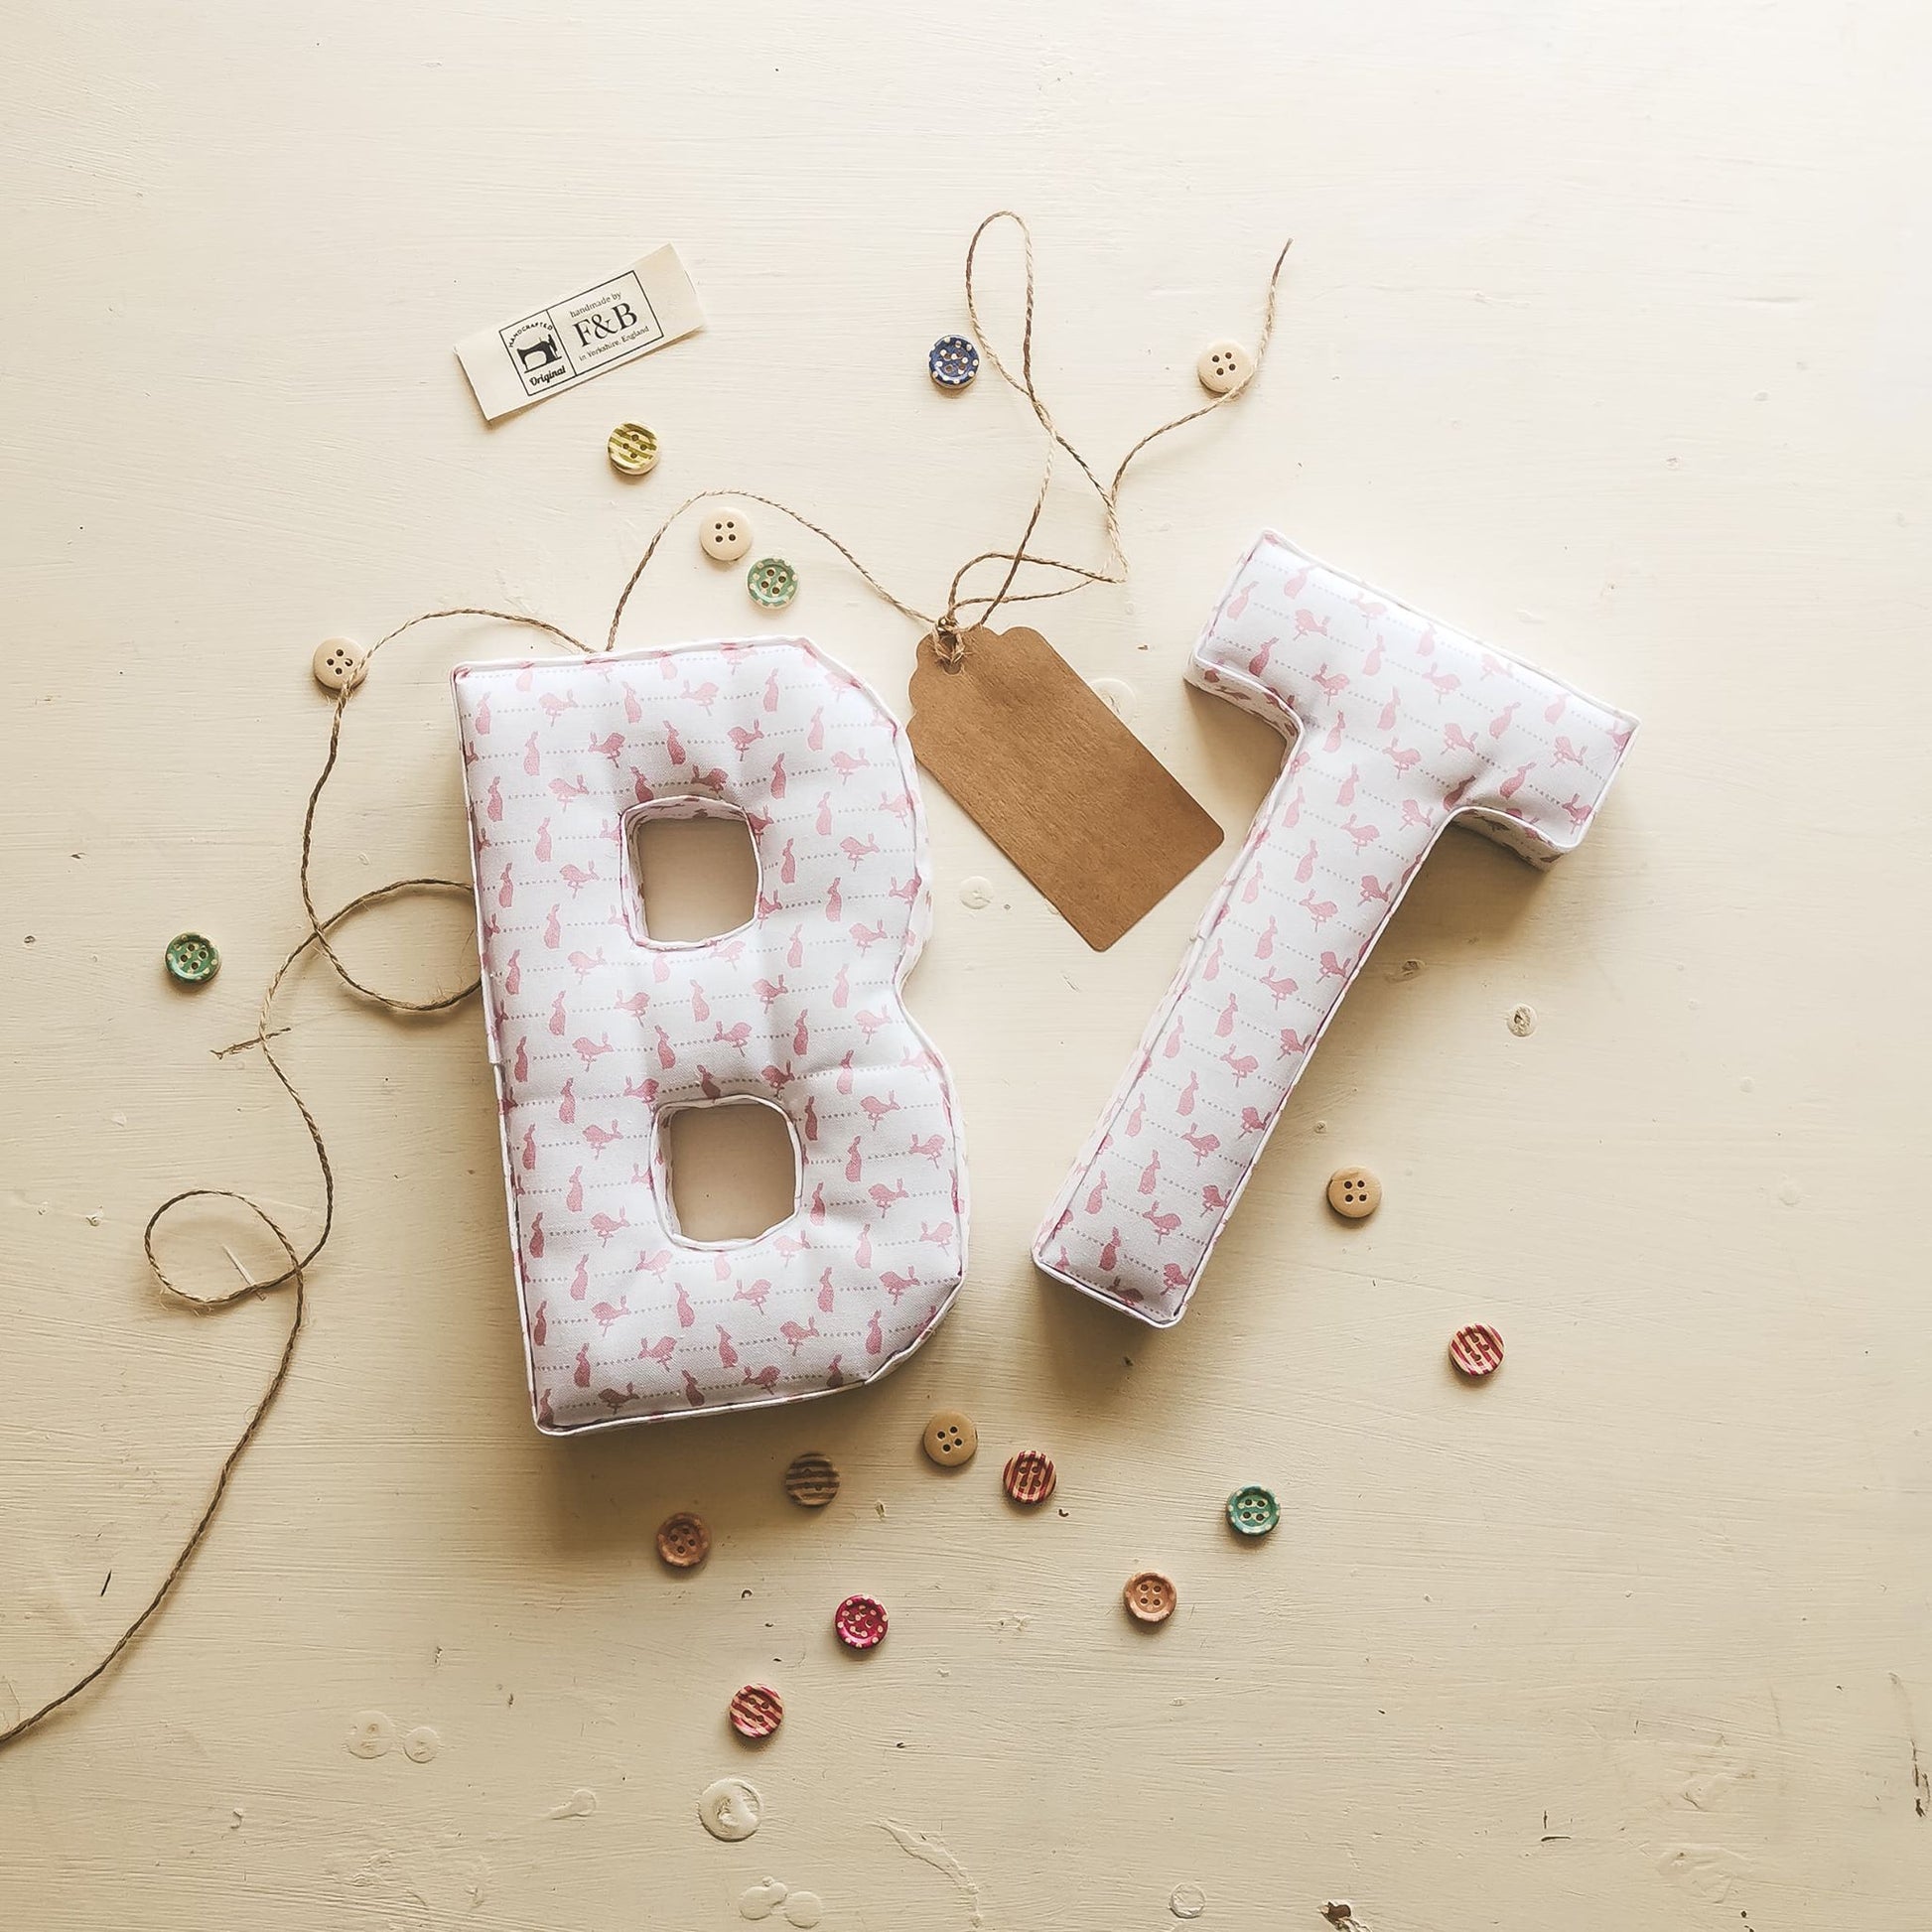 Letter in Hare & Dot Print - F&B Crafts - F&B Designs